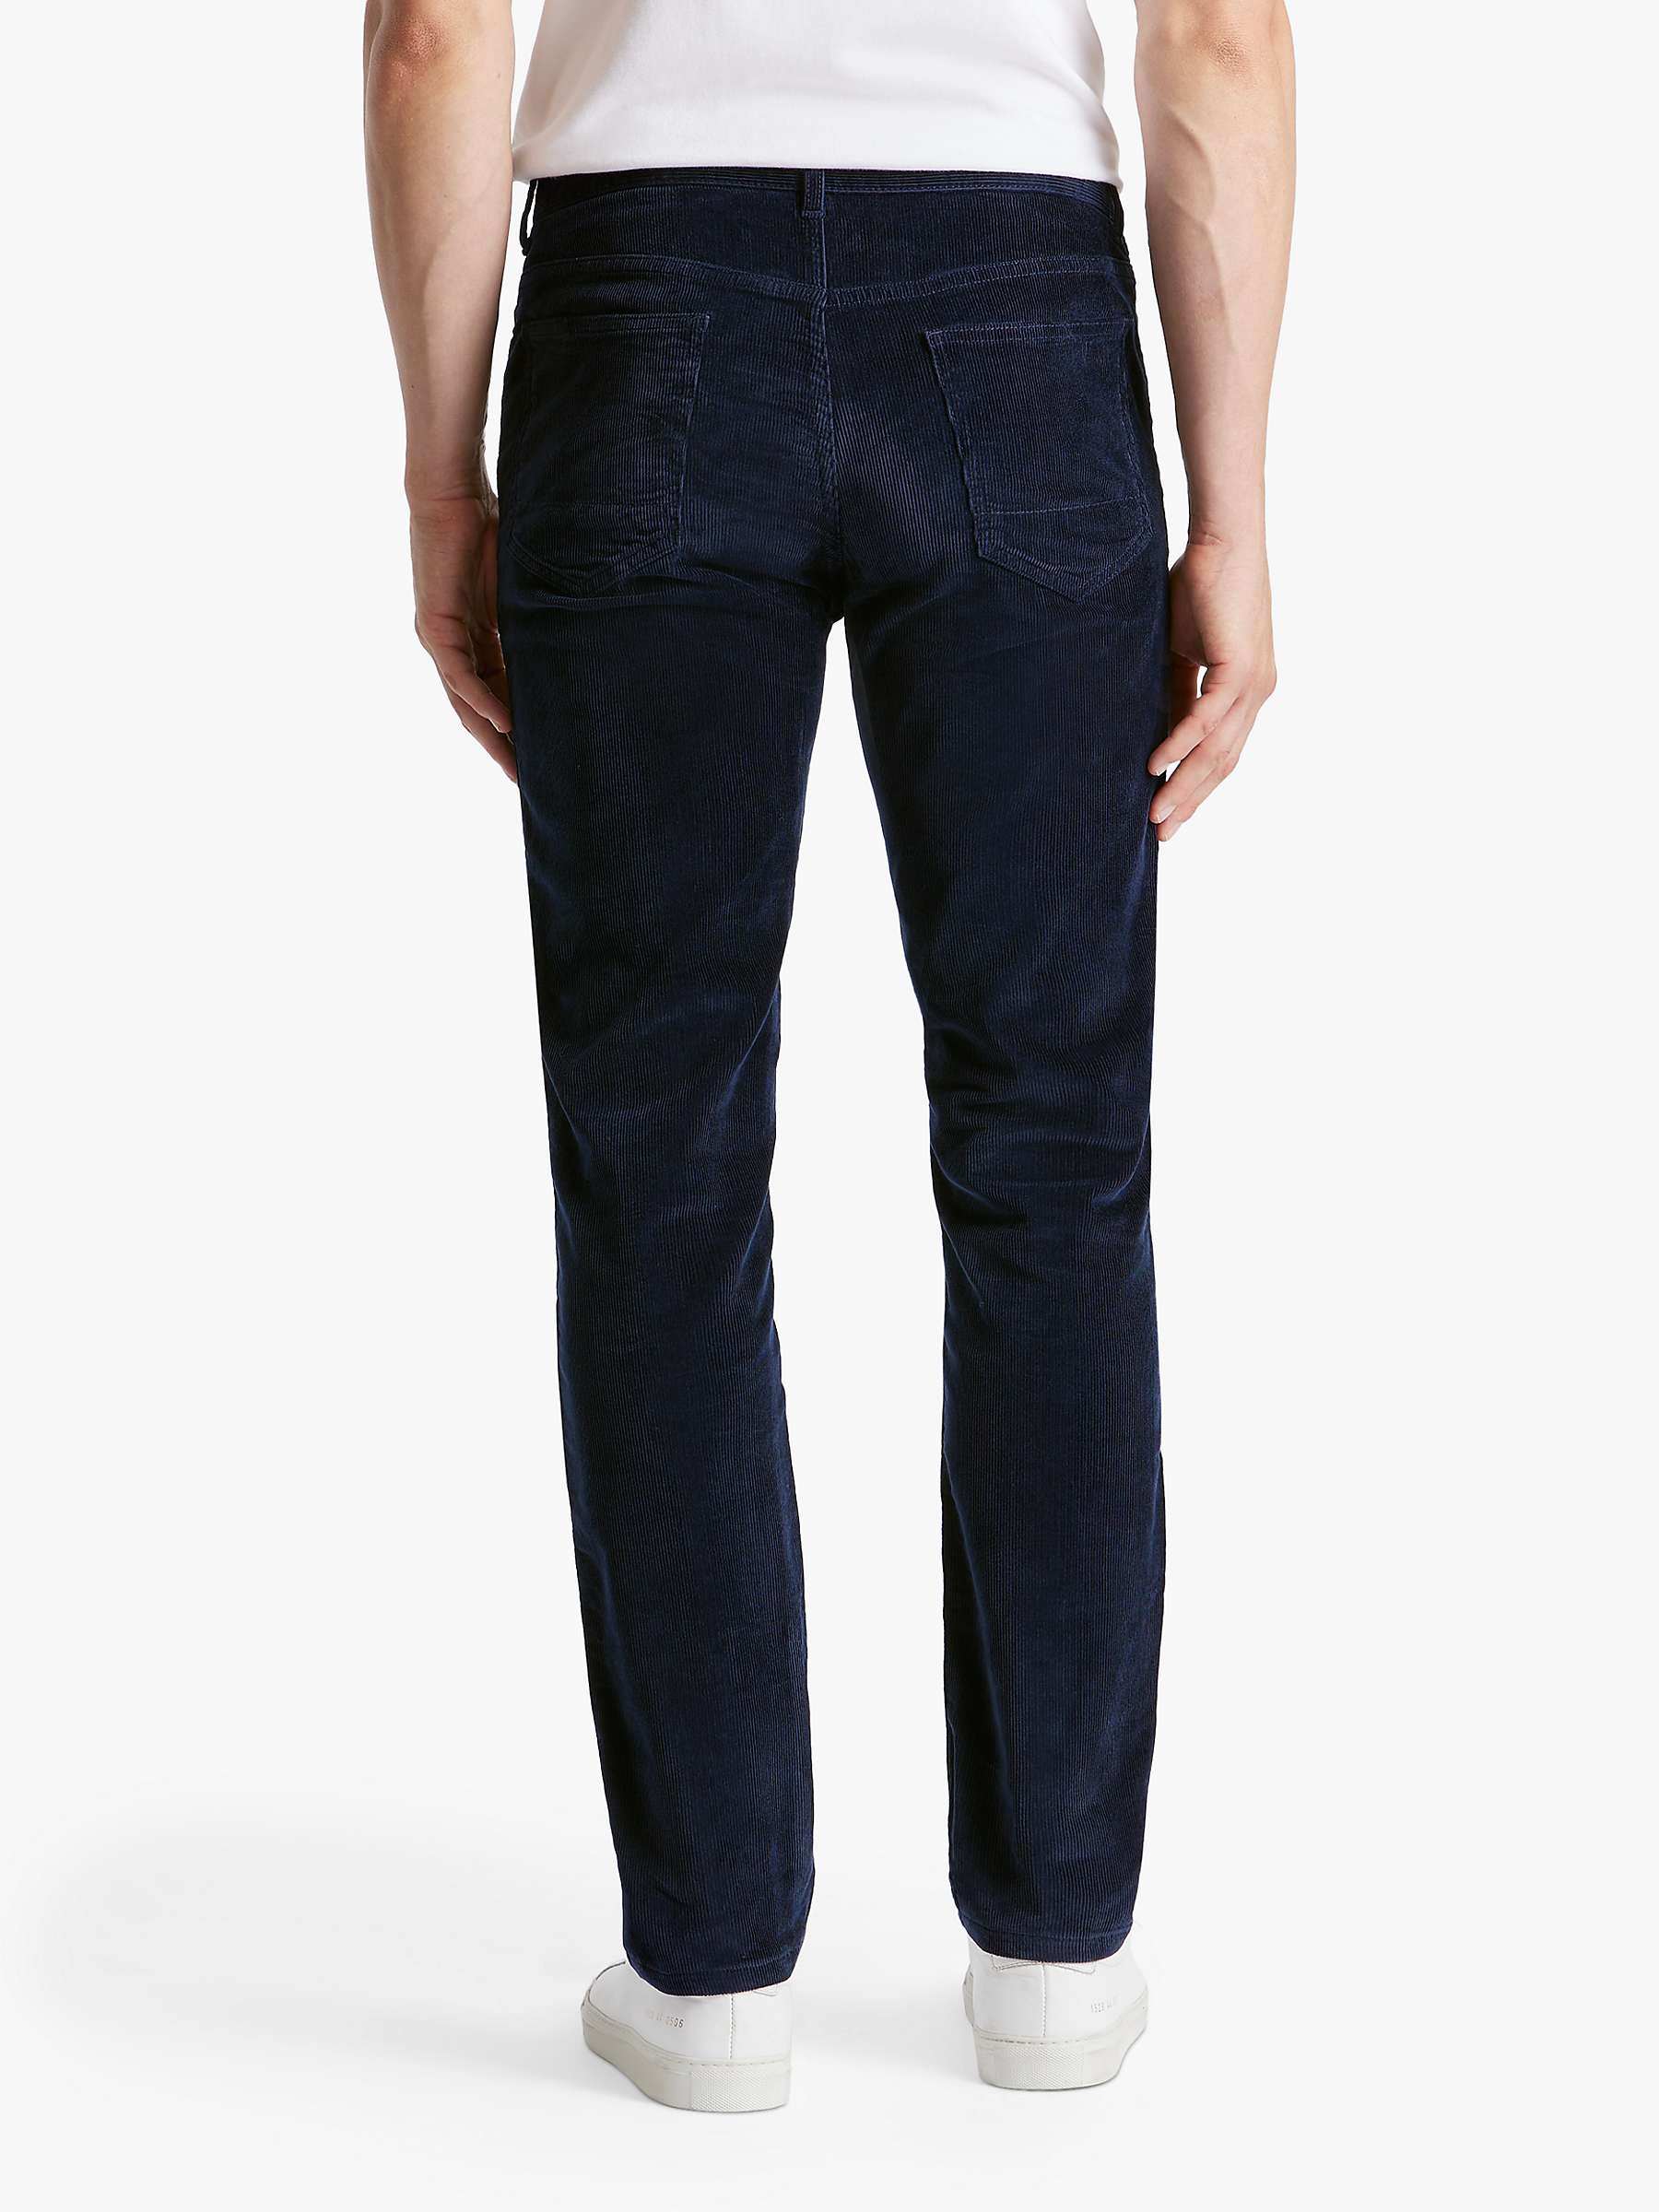 Buy SPOKE Fives Build A Slim Thigh Corduroy Trousers Online at johnlewis.com